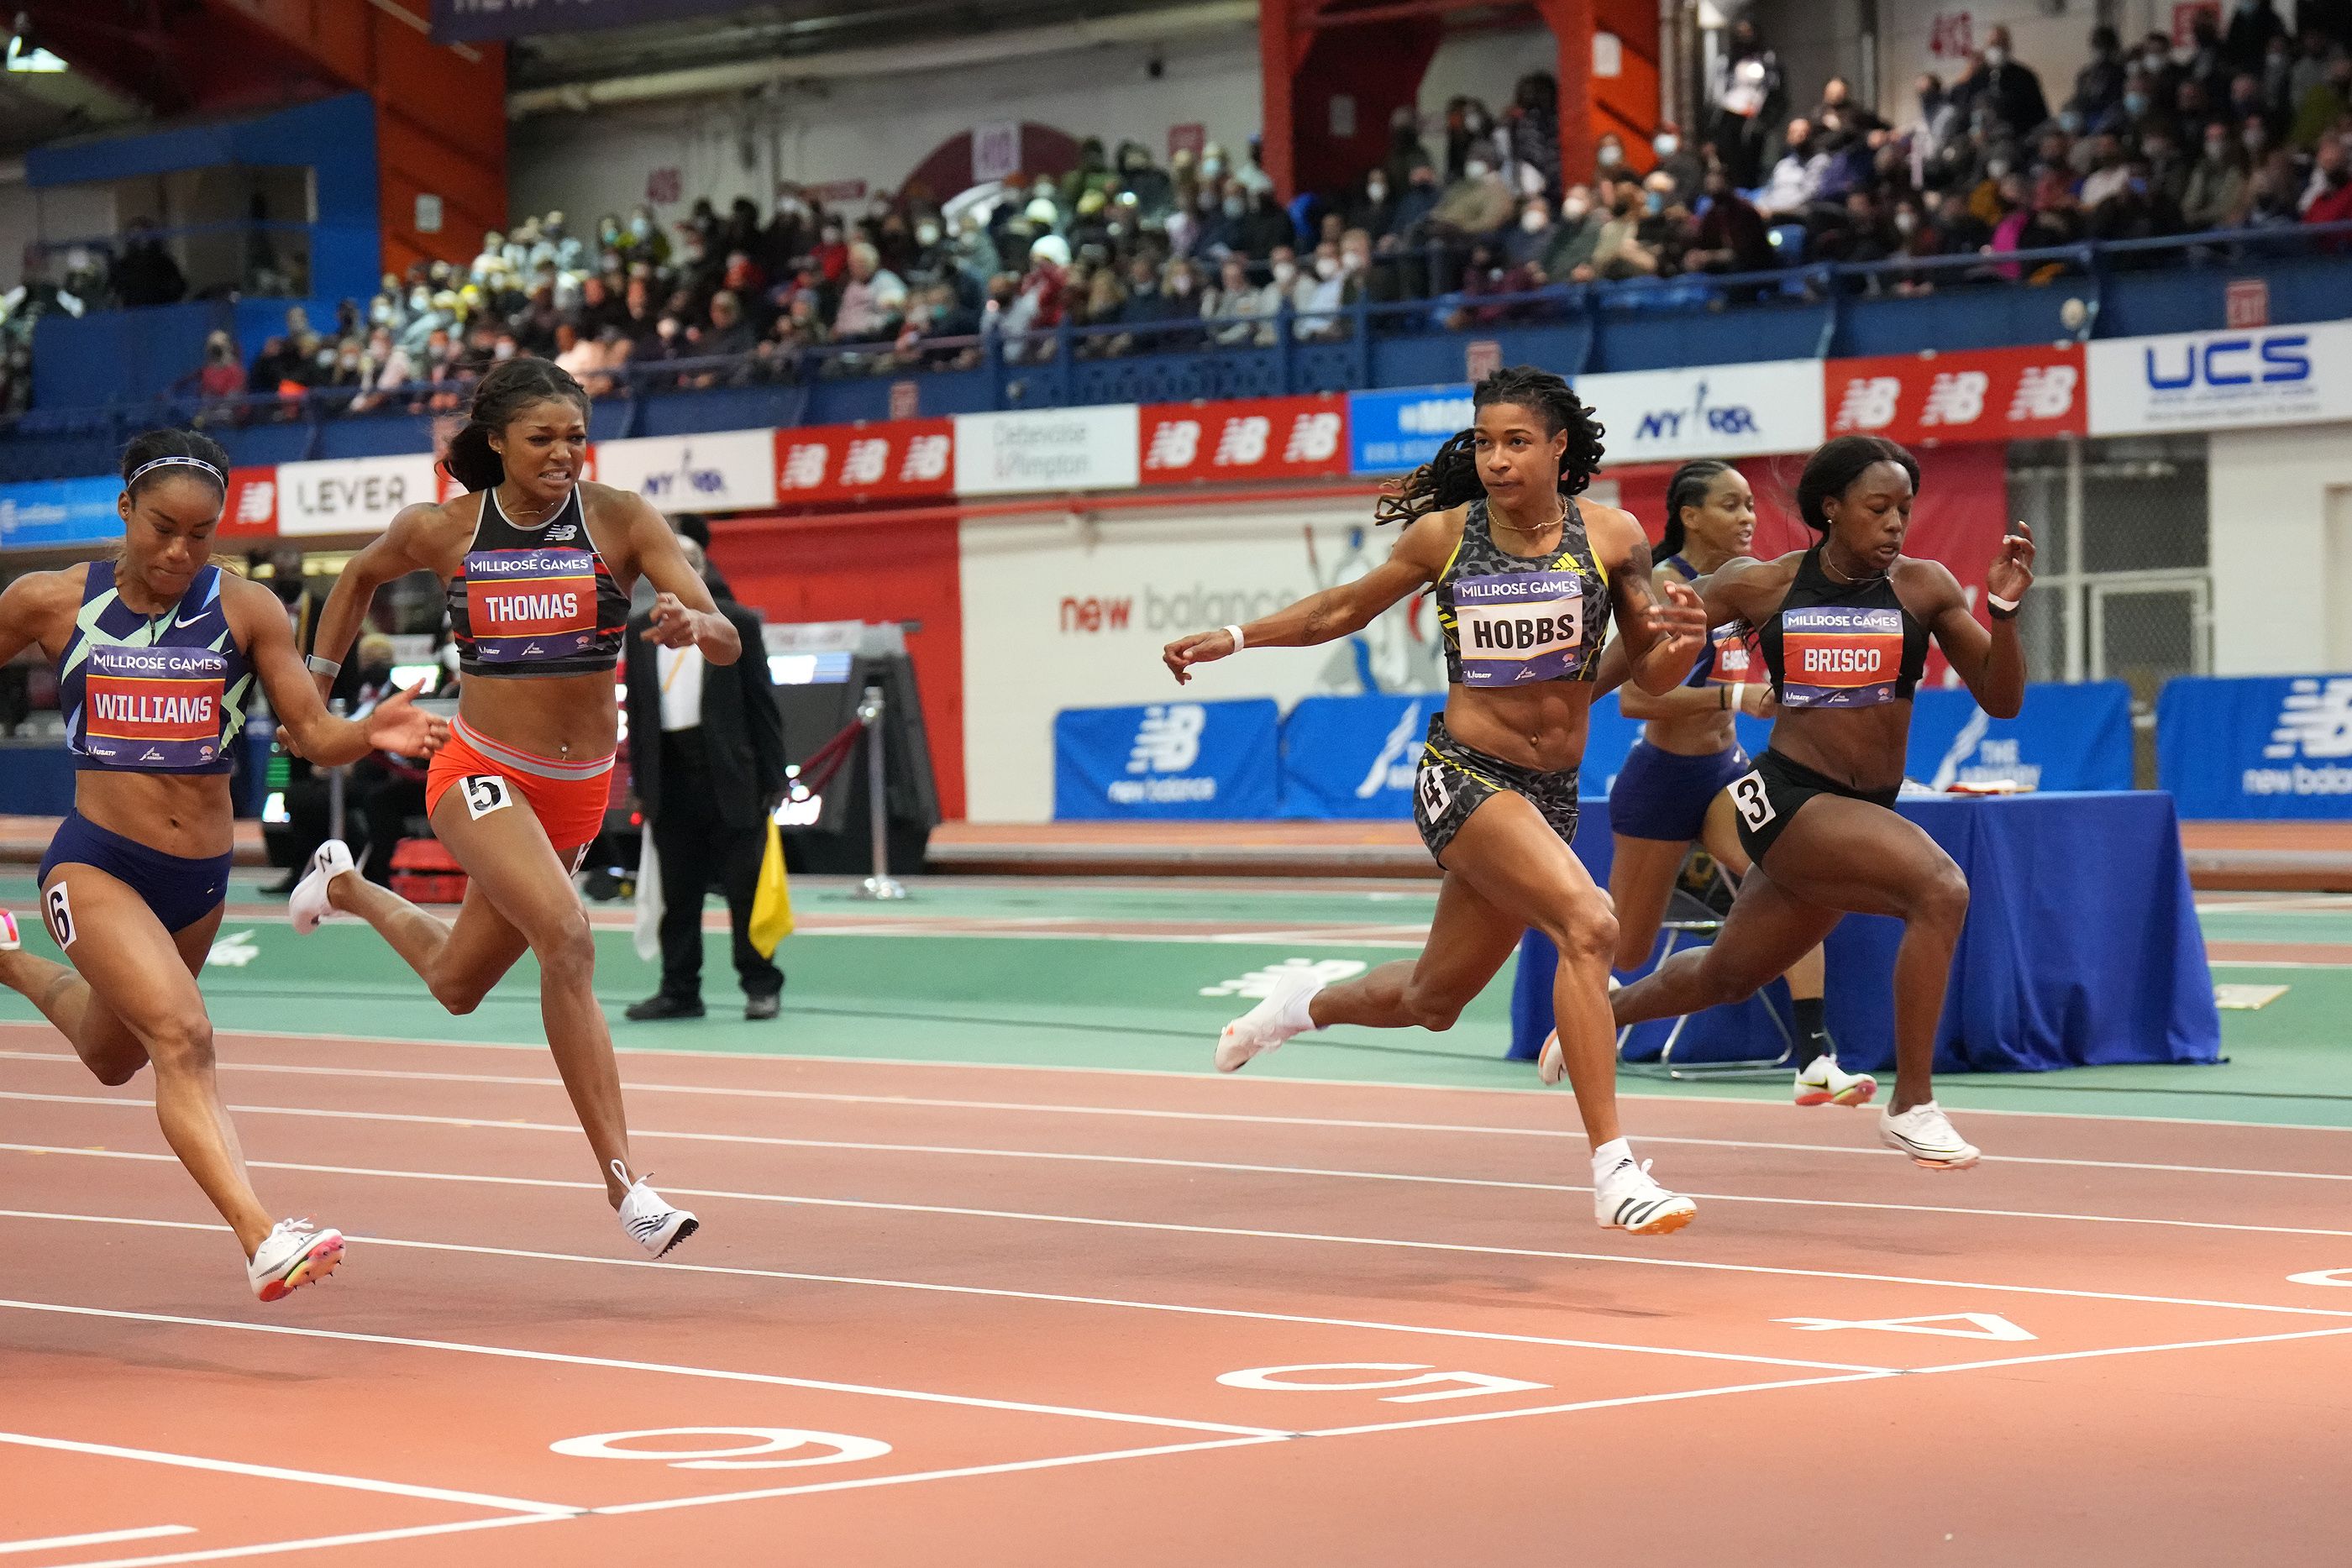 Aleia Hobbs wins the 60m at the Millrose Games